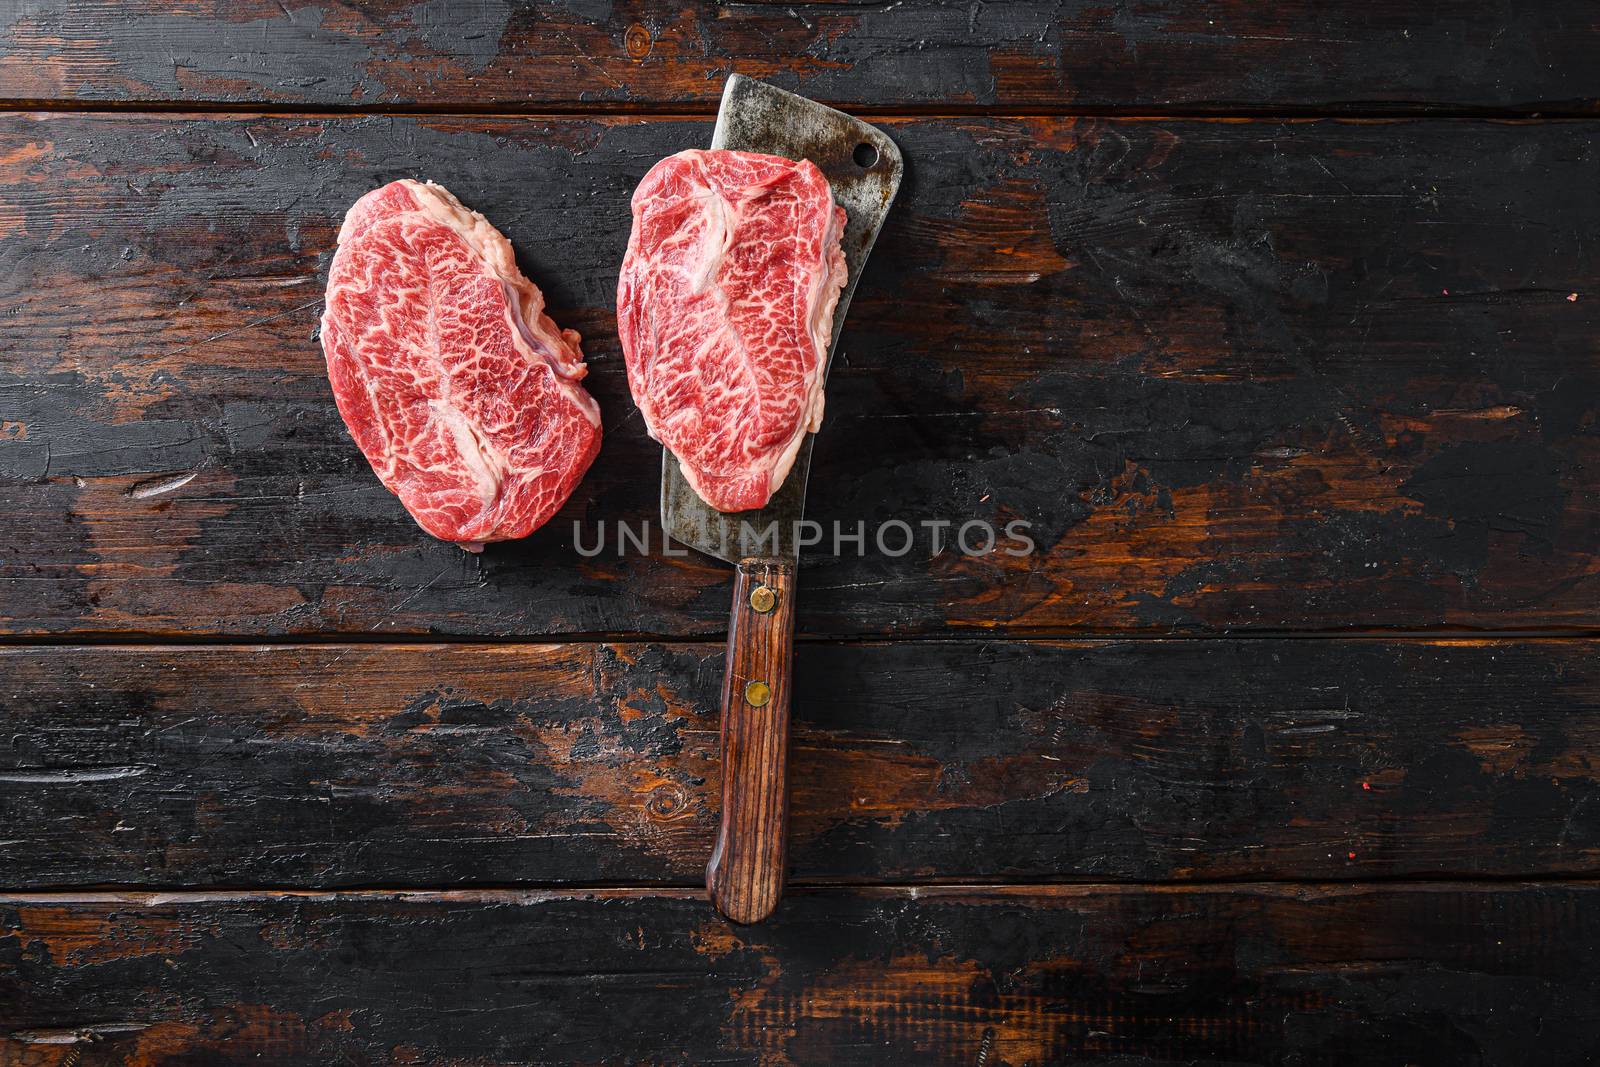 Flat iron steak, raw meat, marbled beef Top blade chuck cut on metal butcher cleaver knife top view space for text.